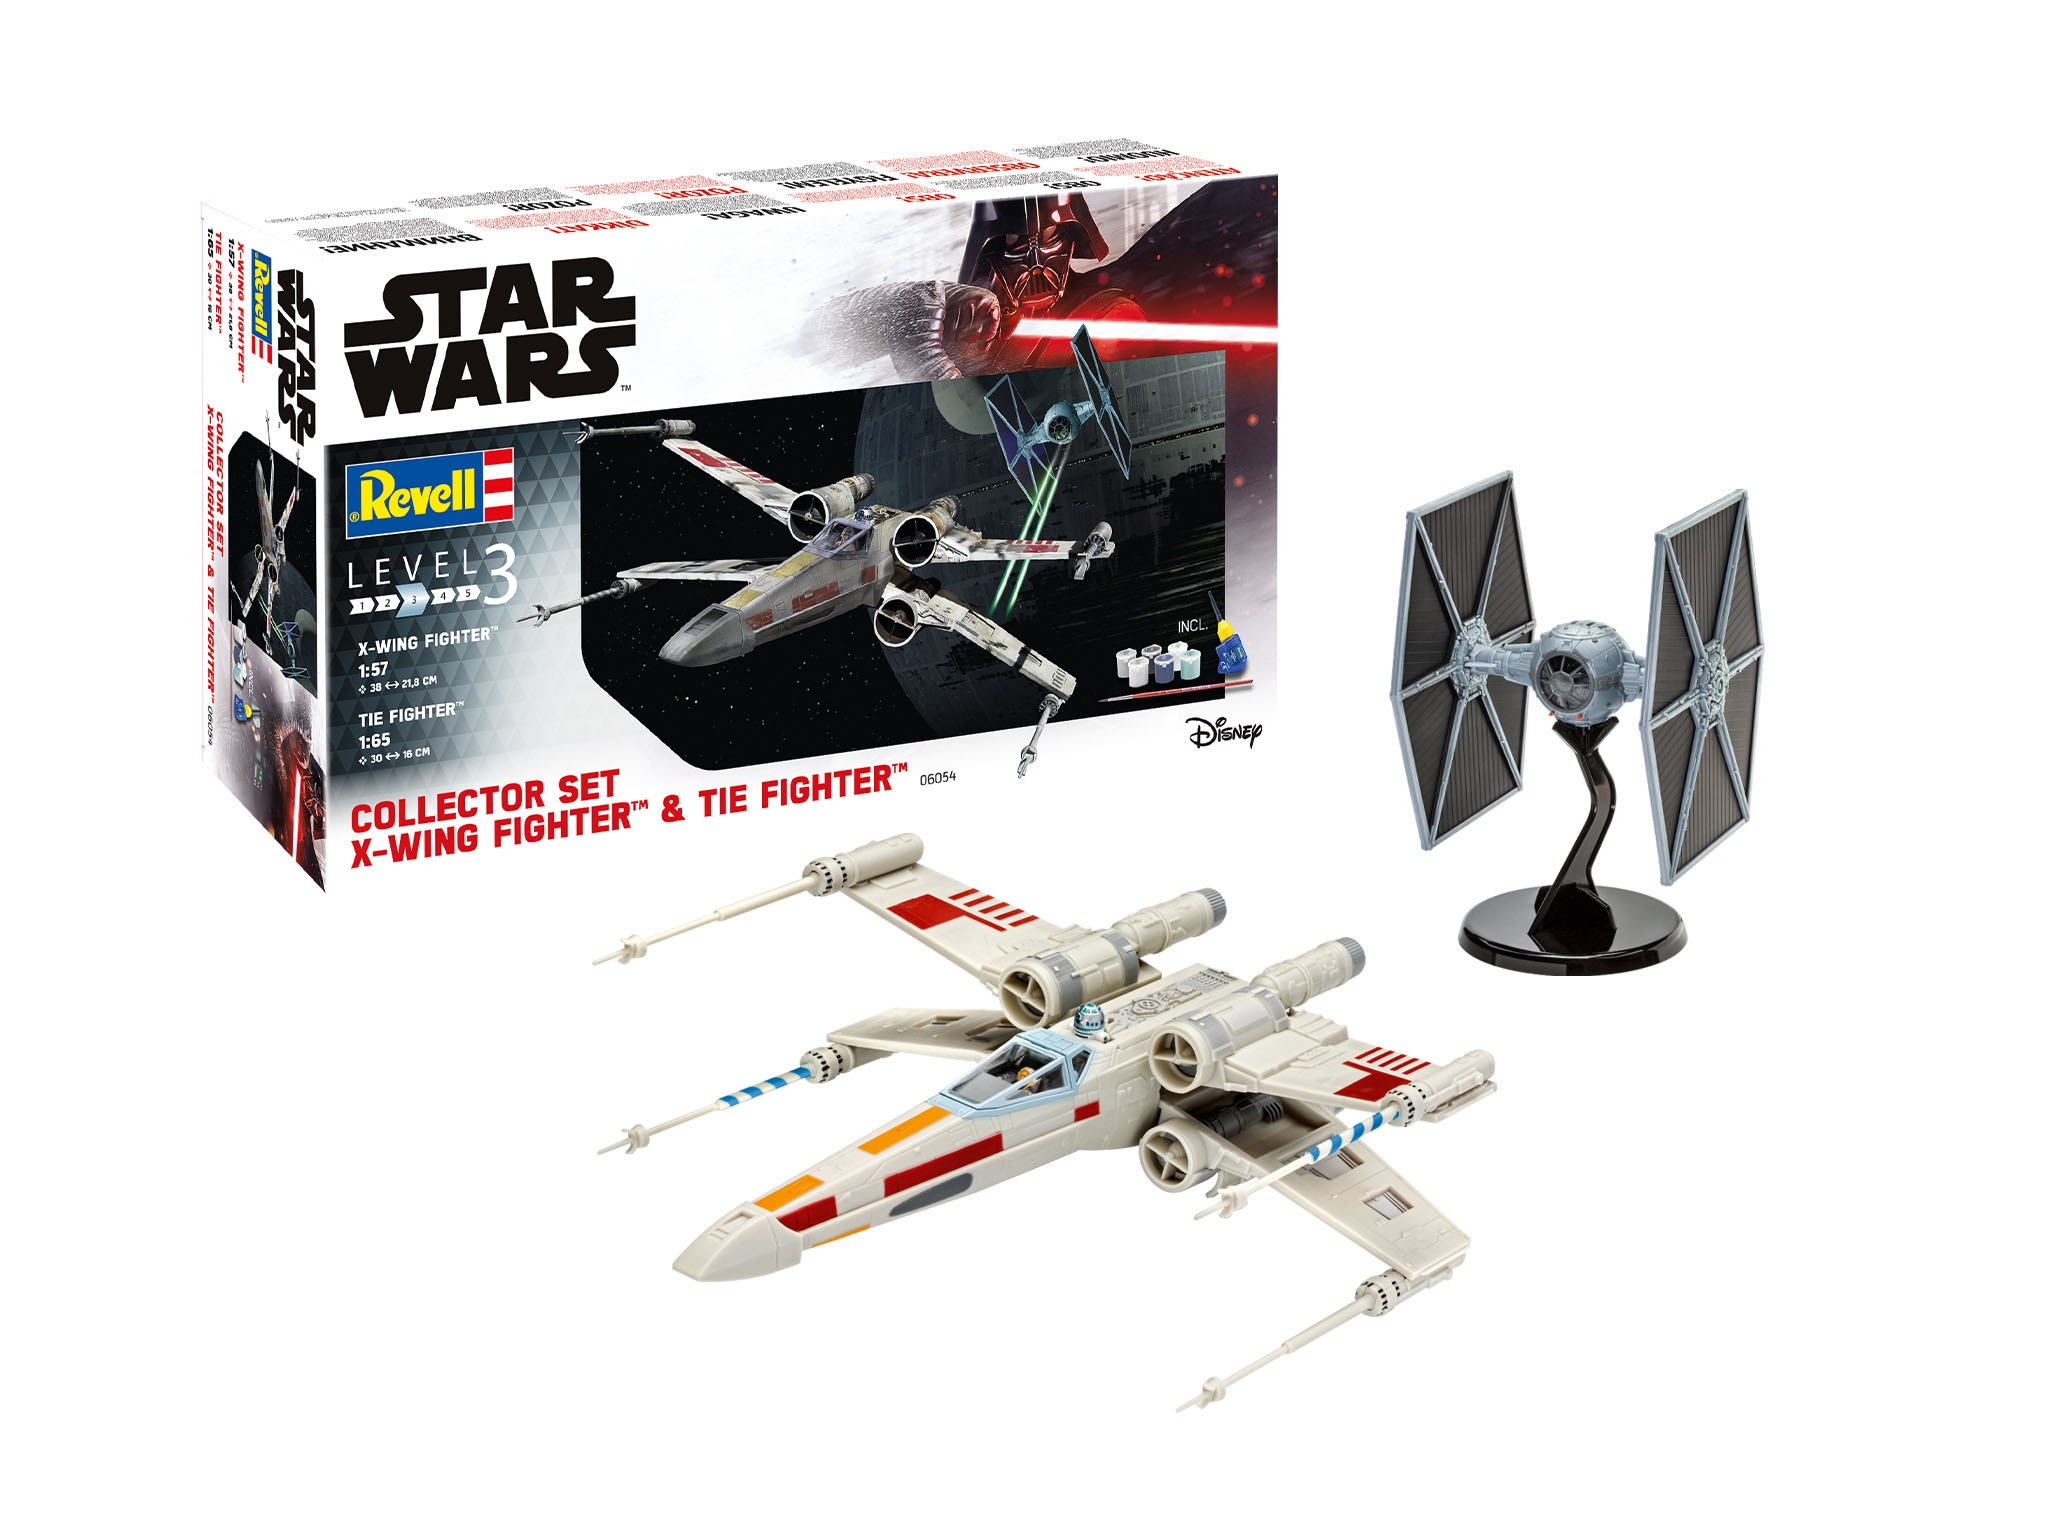 Revell Collector Set X-Wing Fighter + TIE Fighter in 1:57 & 1:65 bouwpakket